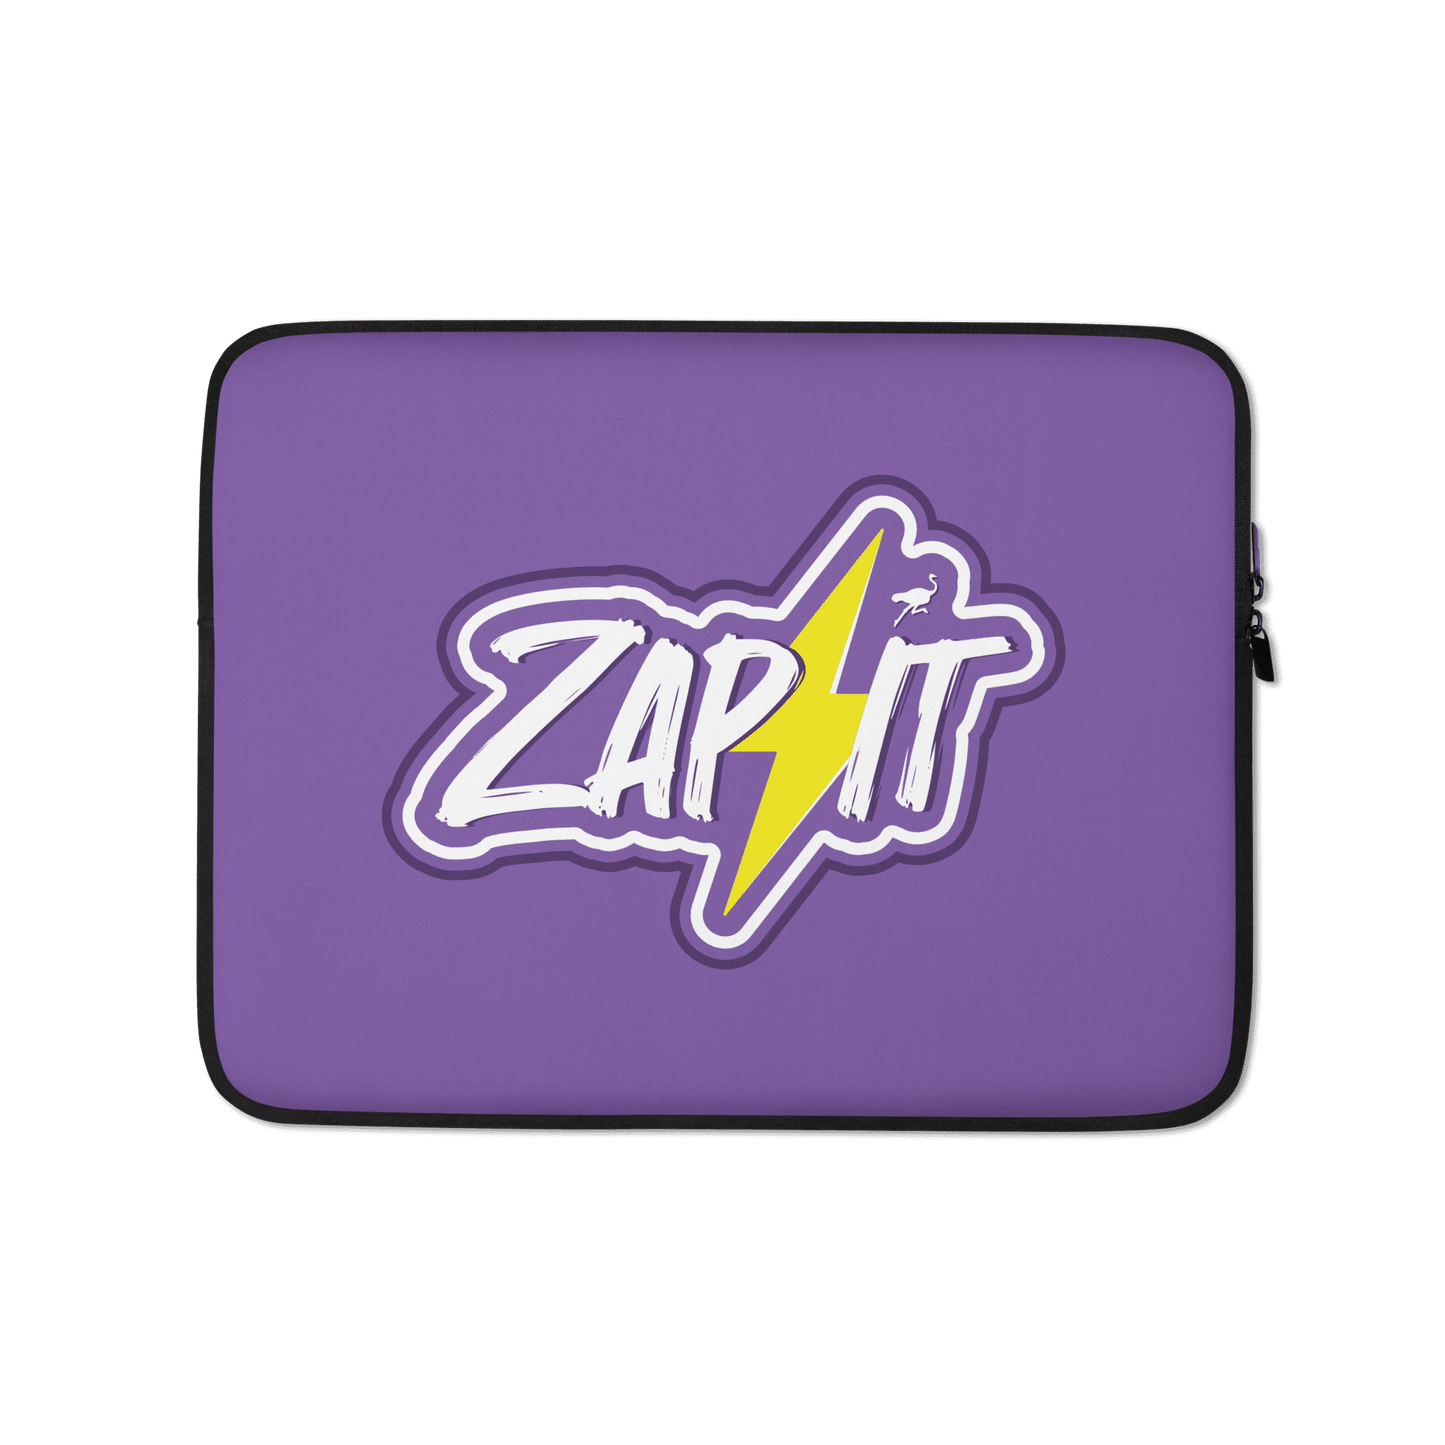 Front view of a purple 13 inch nostr laptop sleeve.